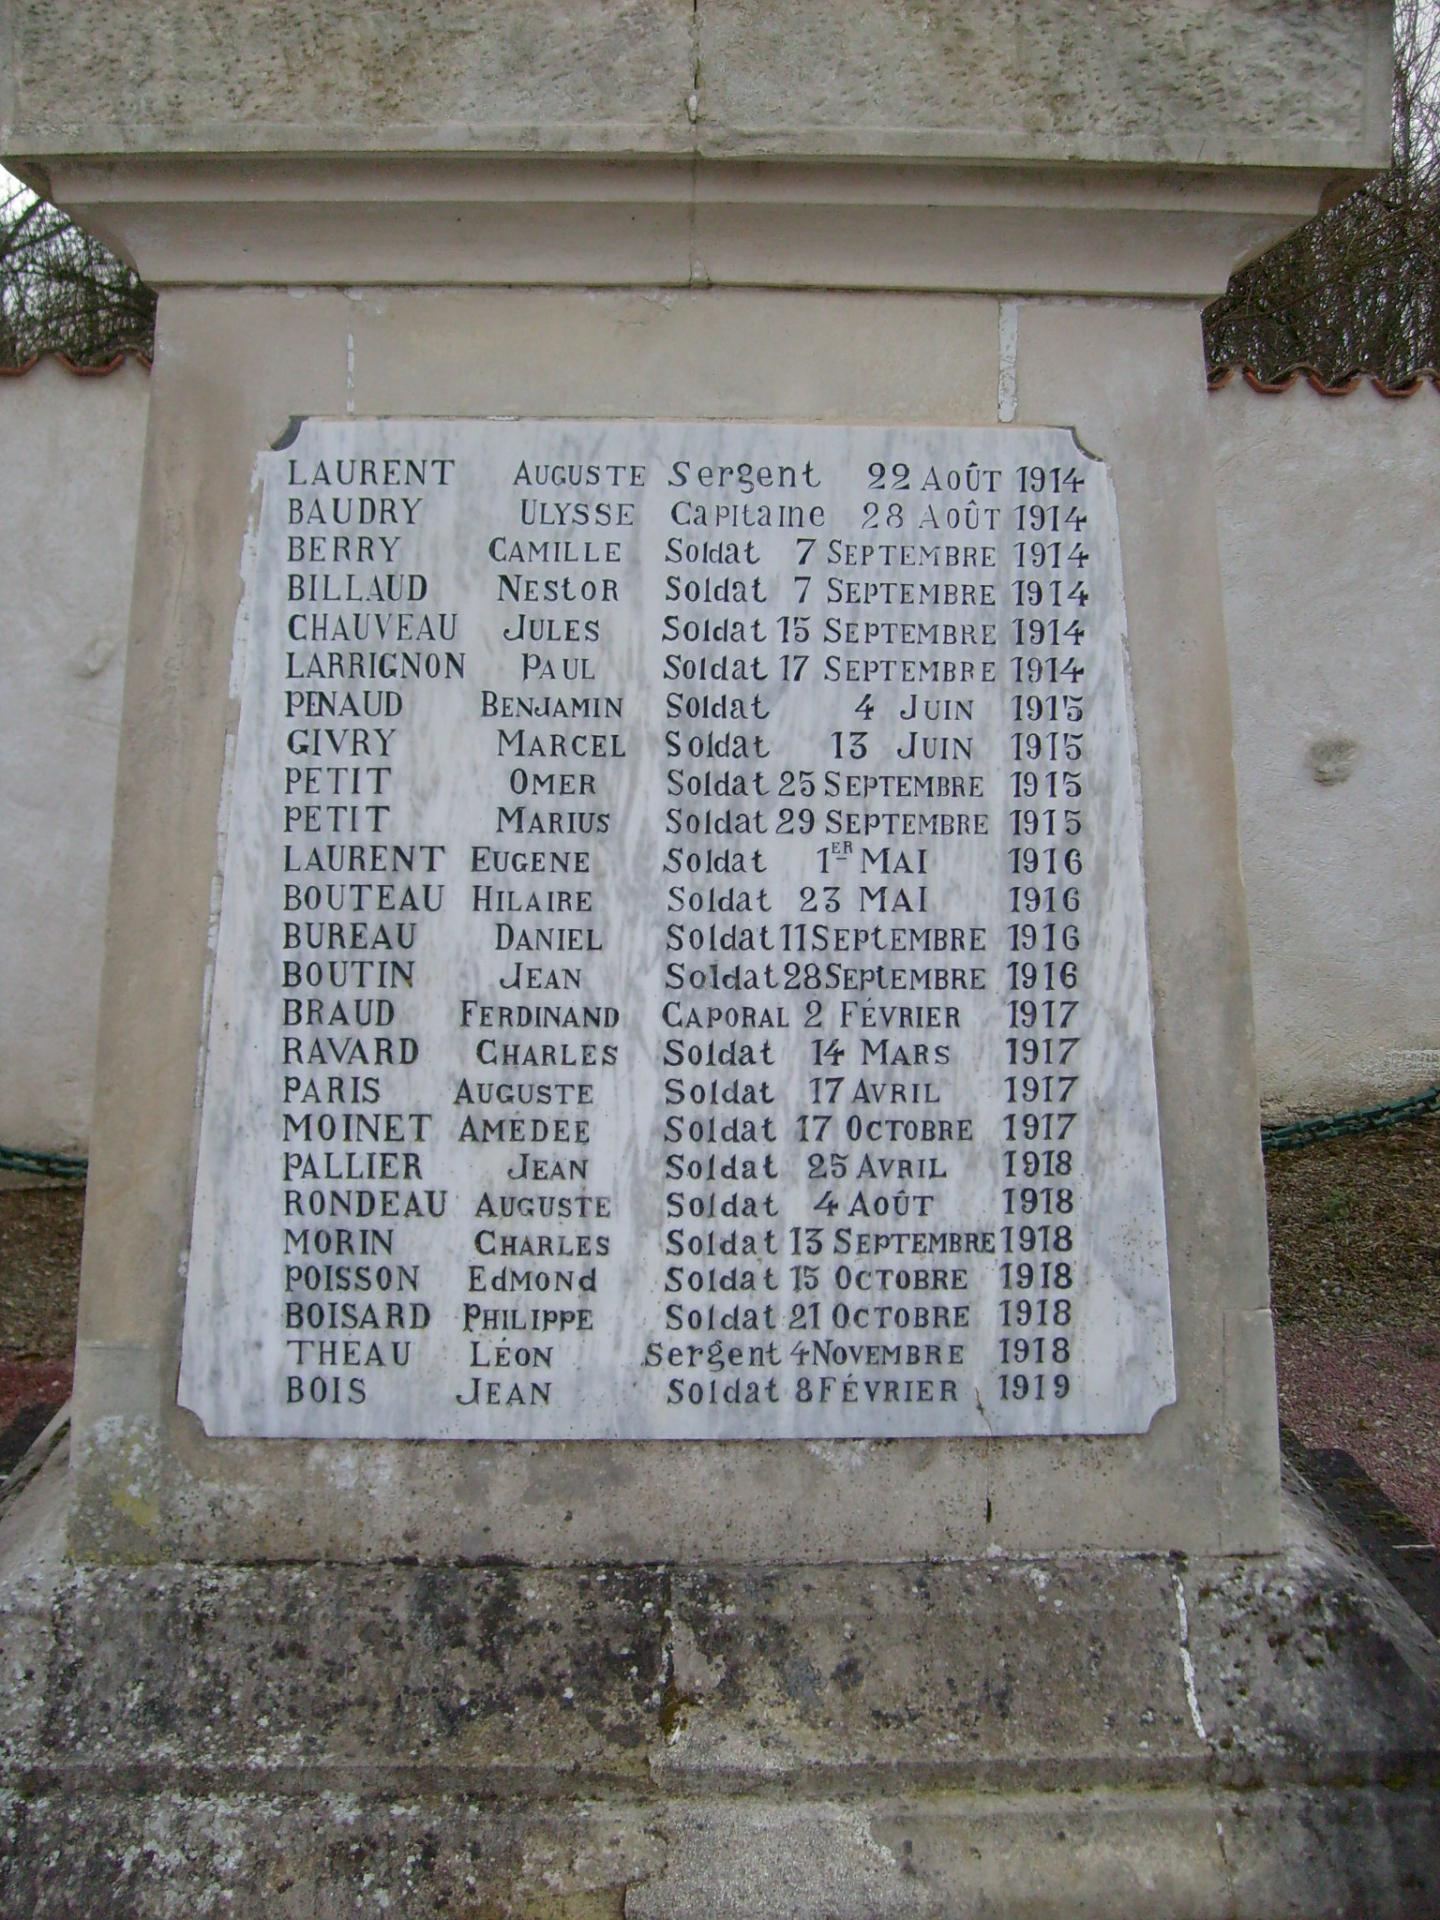 D moinet amedee monument verines 17 oct 1917